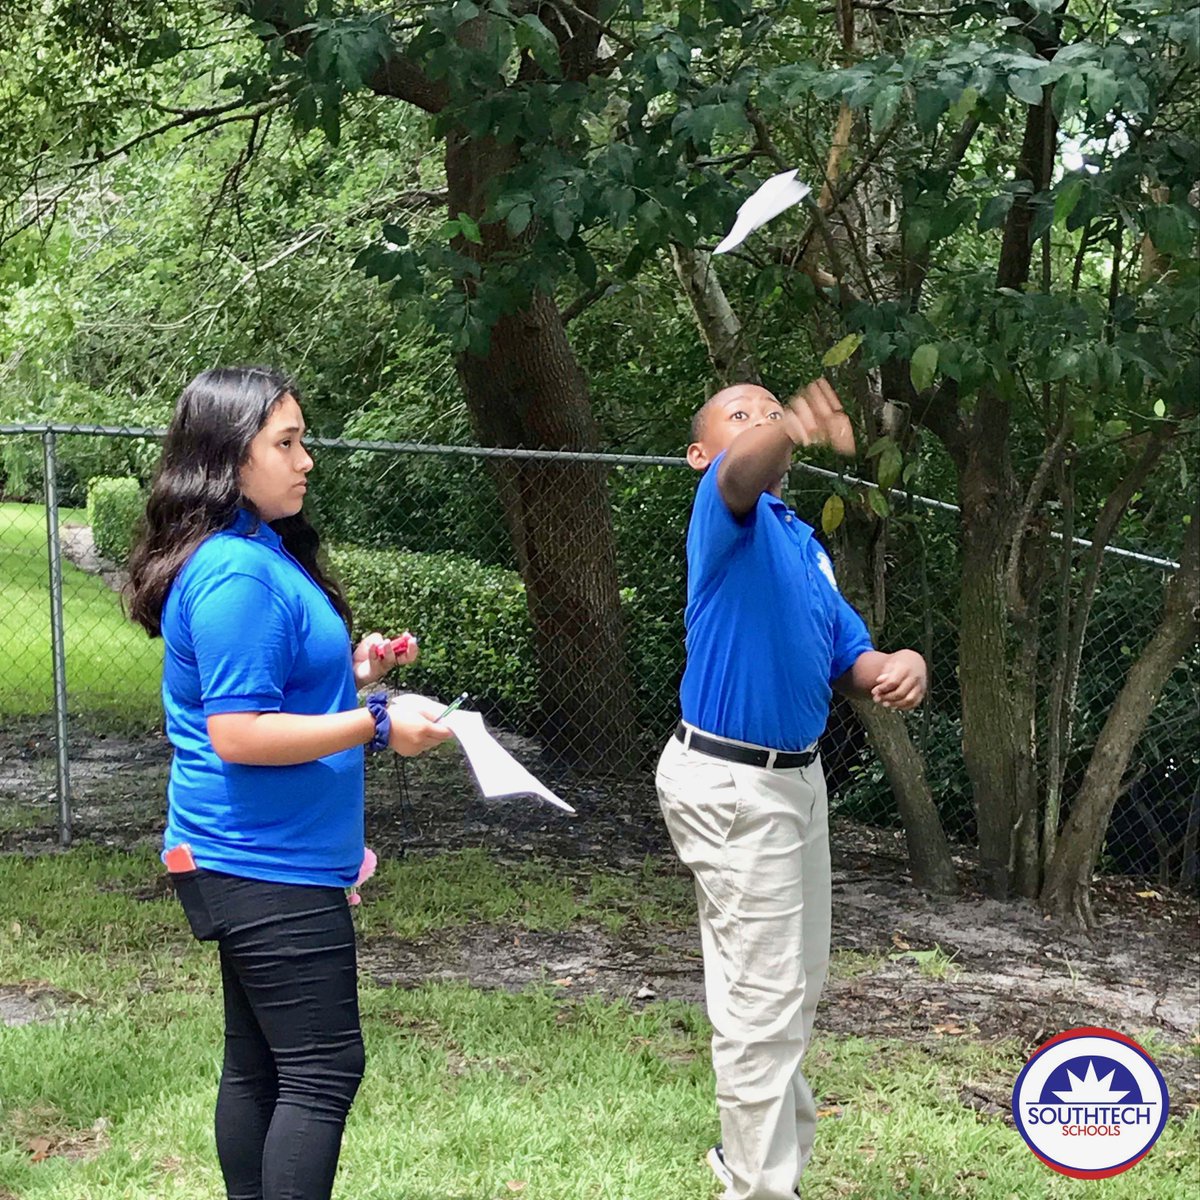 Who says science isn't fun? Ms. Settle's S.T.E.M. class recording and graphing paper-airplane flight time. #STPRocks #choice #NextGenWorkForce #southtechschools #ScienceIsFun